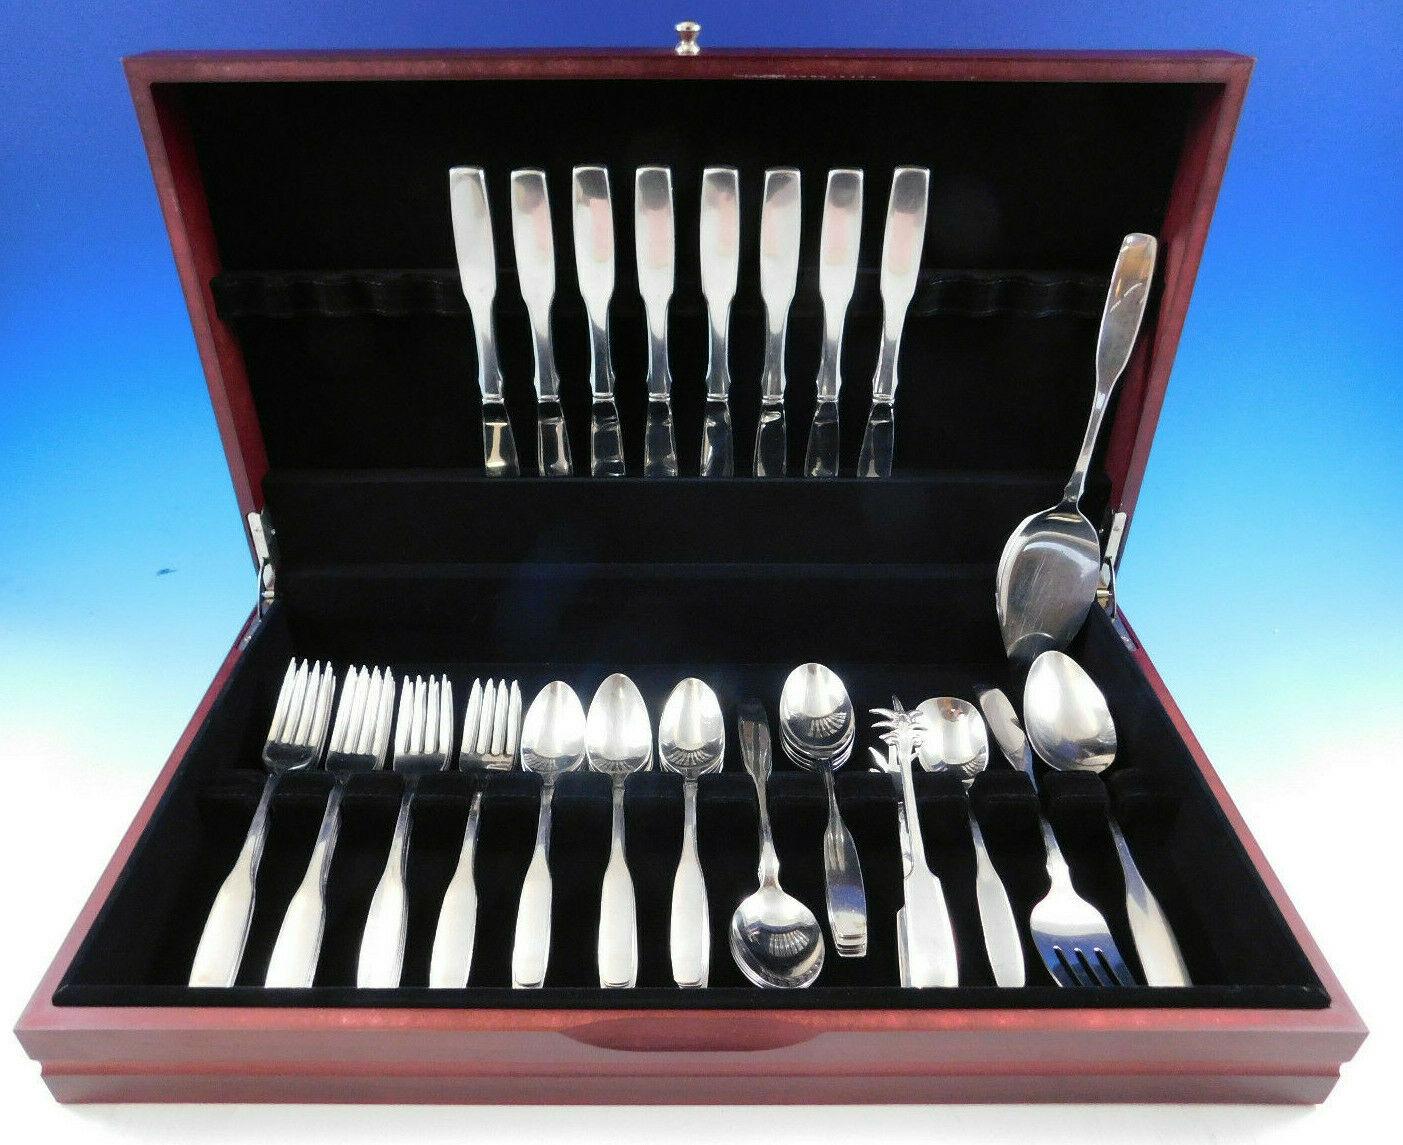 Estate Paul Revere by Community Oneida stainless steel flatware set, 45 pieces. This set includes:

8 knives, 8 3/4